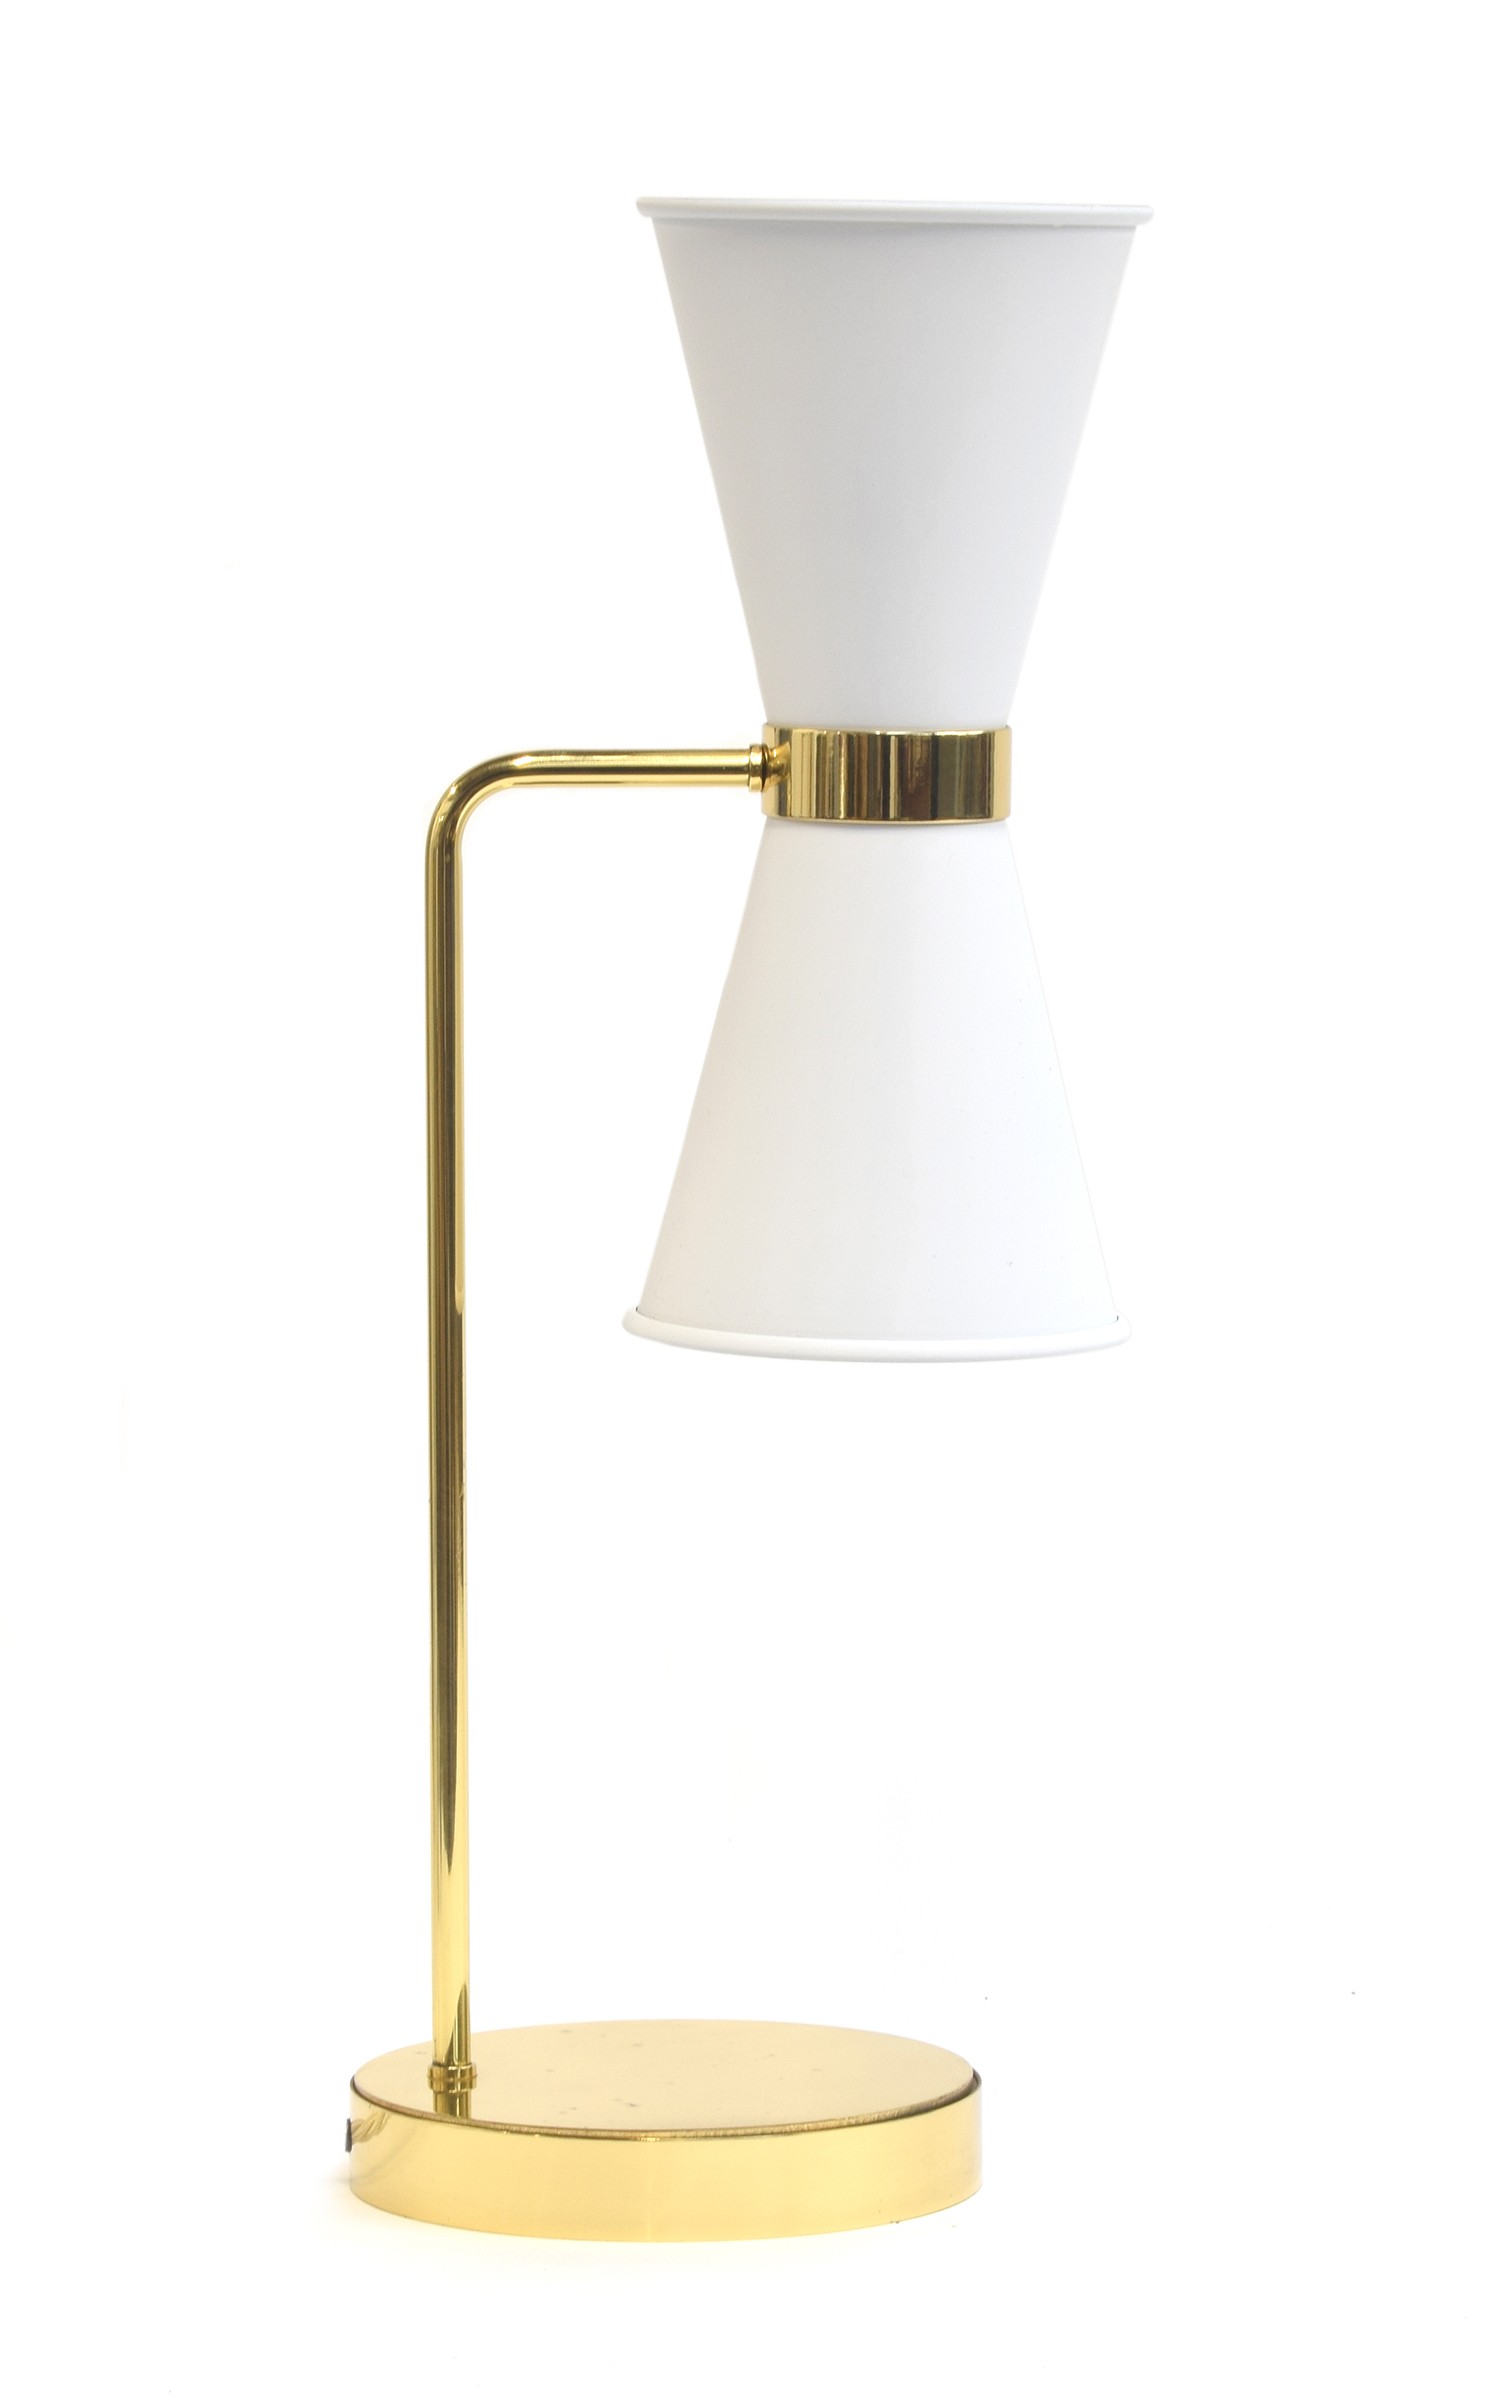 A David Hunt 'Hydra' table lamp in brass and Arctic white, 51cm high, rrp. £408